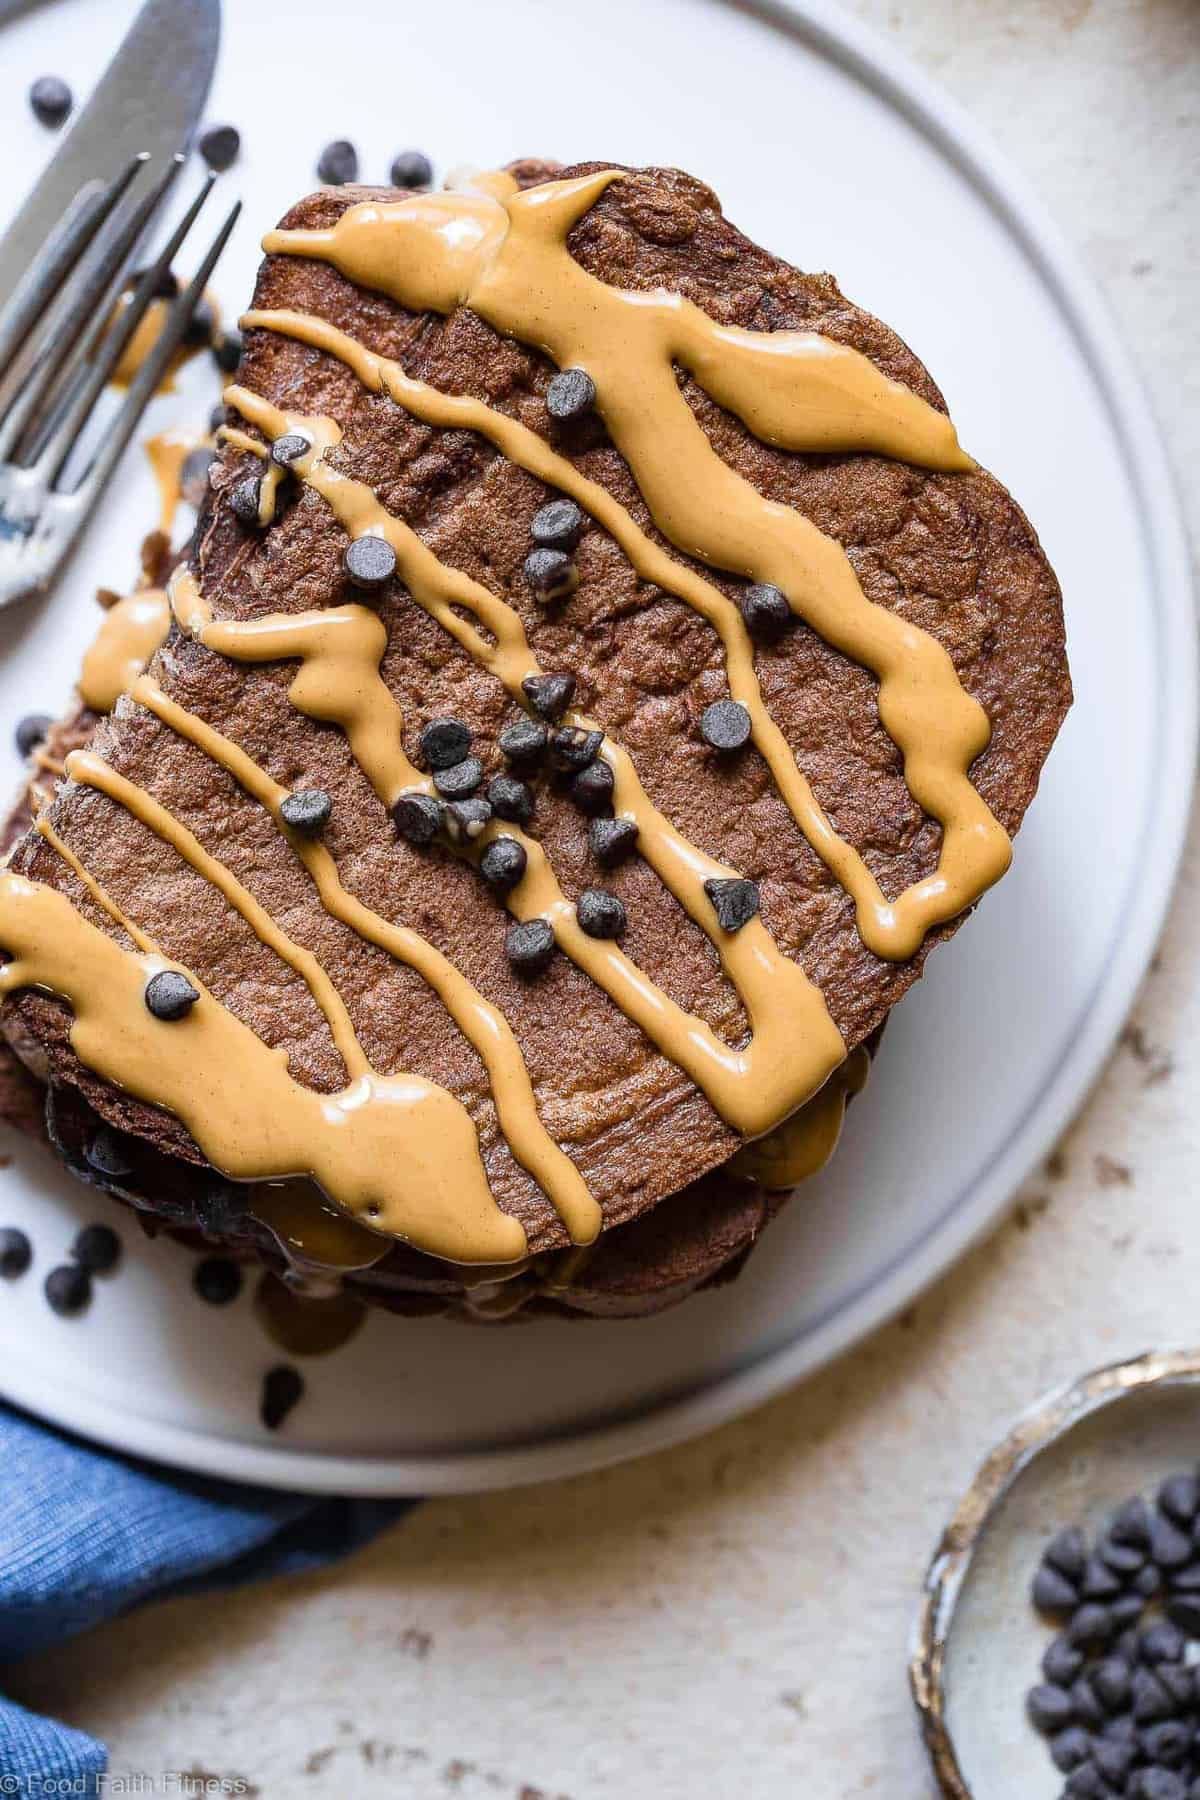 Chocolate Peanut Butter Protein French Toast - This healthy French toast is loaded with chocolate peanut butter goodness and 32g of protein! SO easy to make and has a gluten free and paleo friendly option! Your new favorite breakfast to keep you FULL! | #Foodfaithfitness | #Glutenfree #Healthy #Paleo #Breakfast #FrenchToast